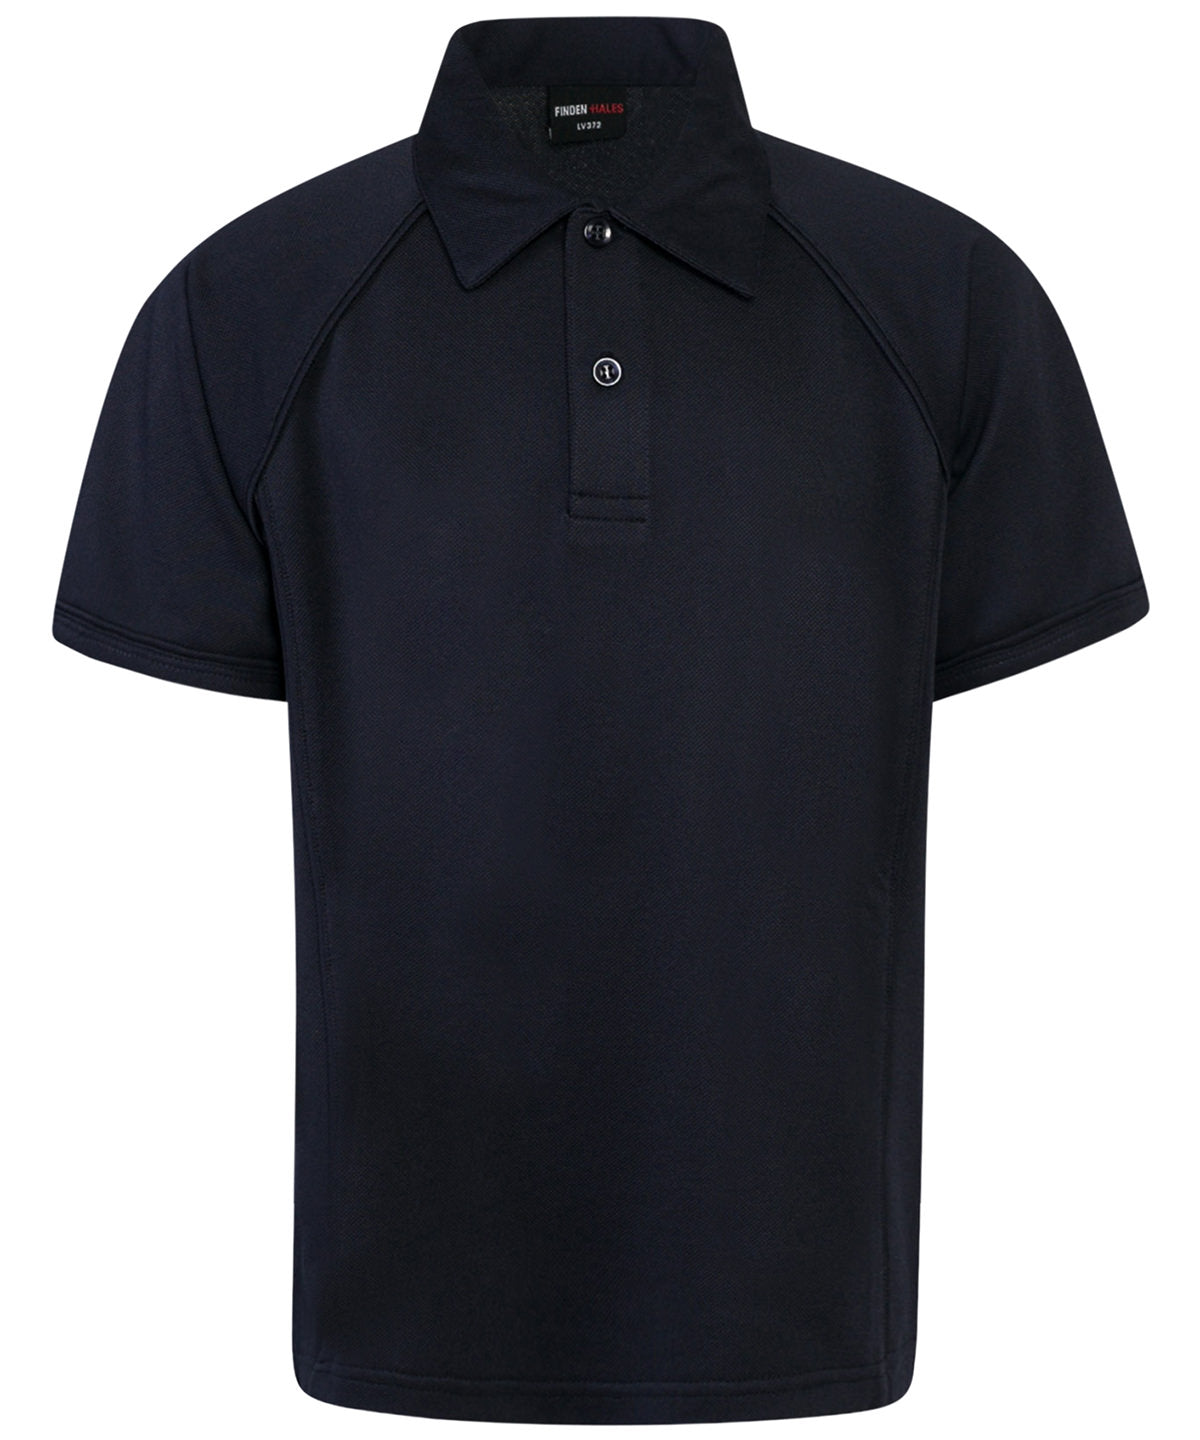 Personalised Polo Shirts - Black Finden & Hales Kids piped performance polo